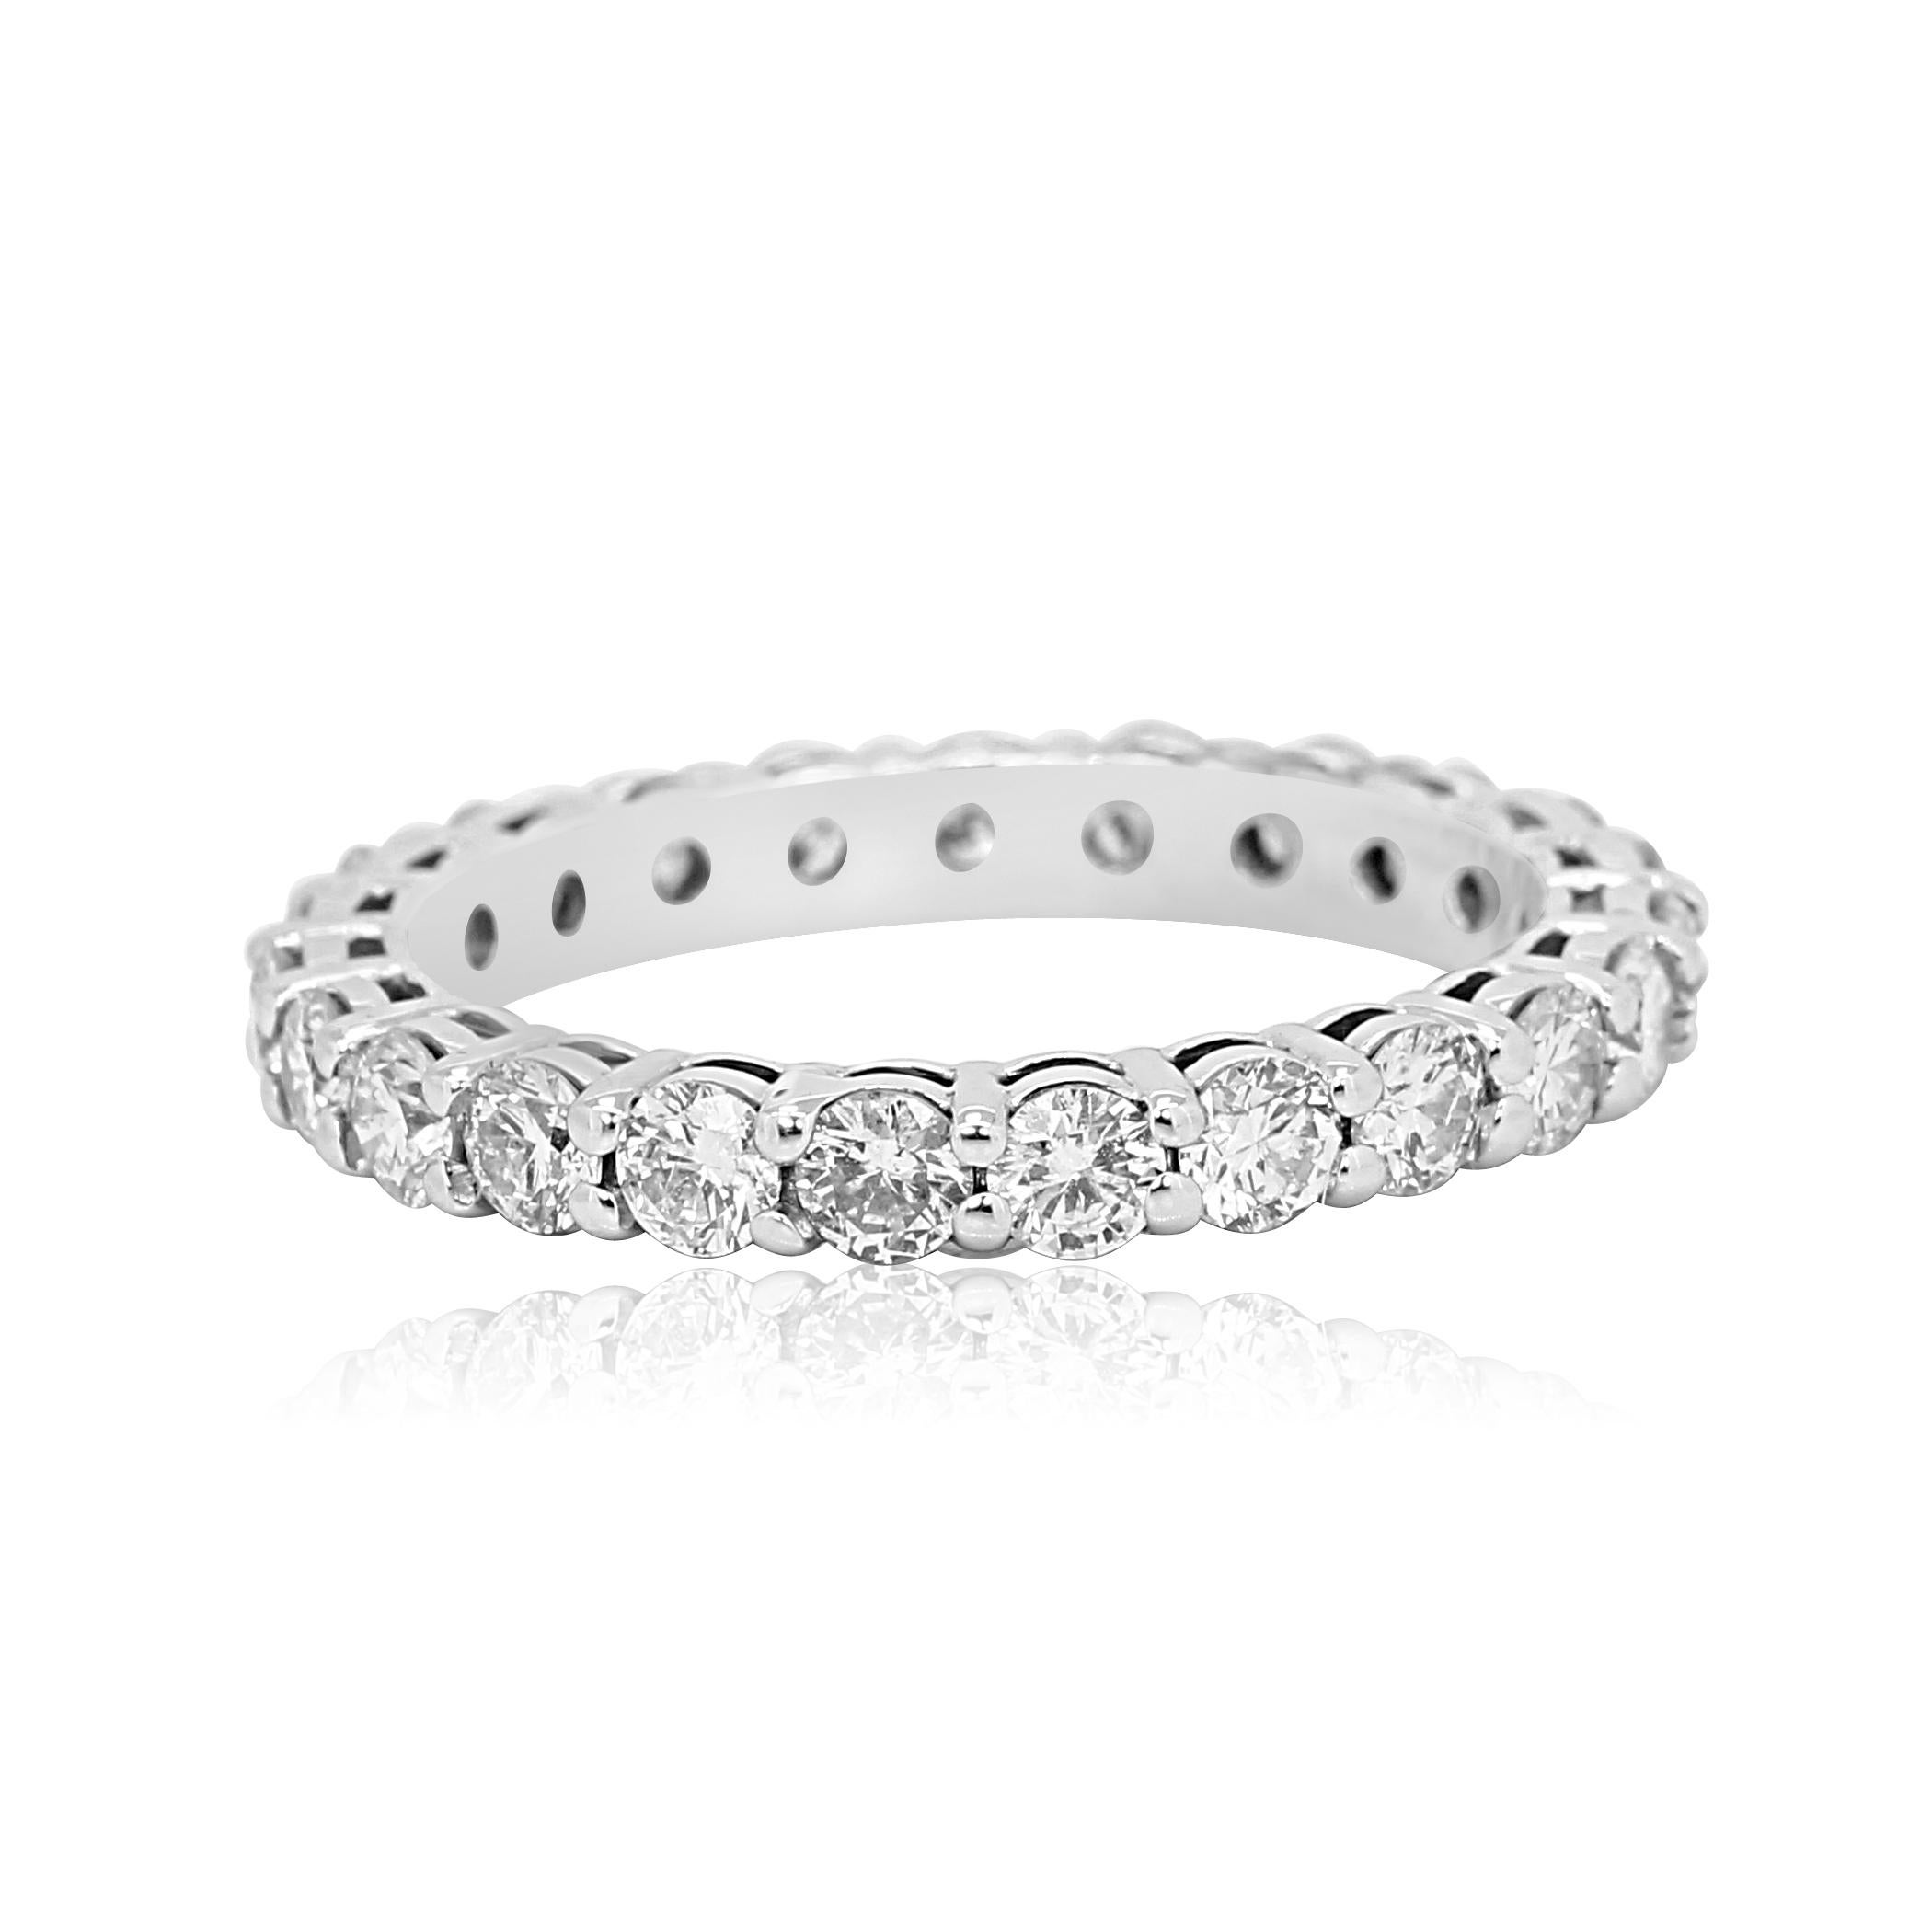 Gorgeous White G-H Color SI Clarity Diamond Round  1.75 Carat in 14K White Gold  Eternity Bridal Wedding Stackable Cocktail Fashion Band Ring

MADE IN USA
Total Diamond Weight 1,75 Carat

Style can be customized or custom made as per your